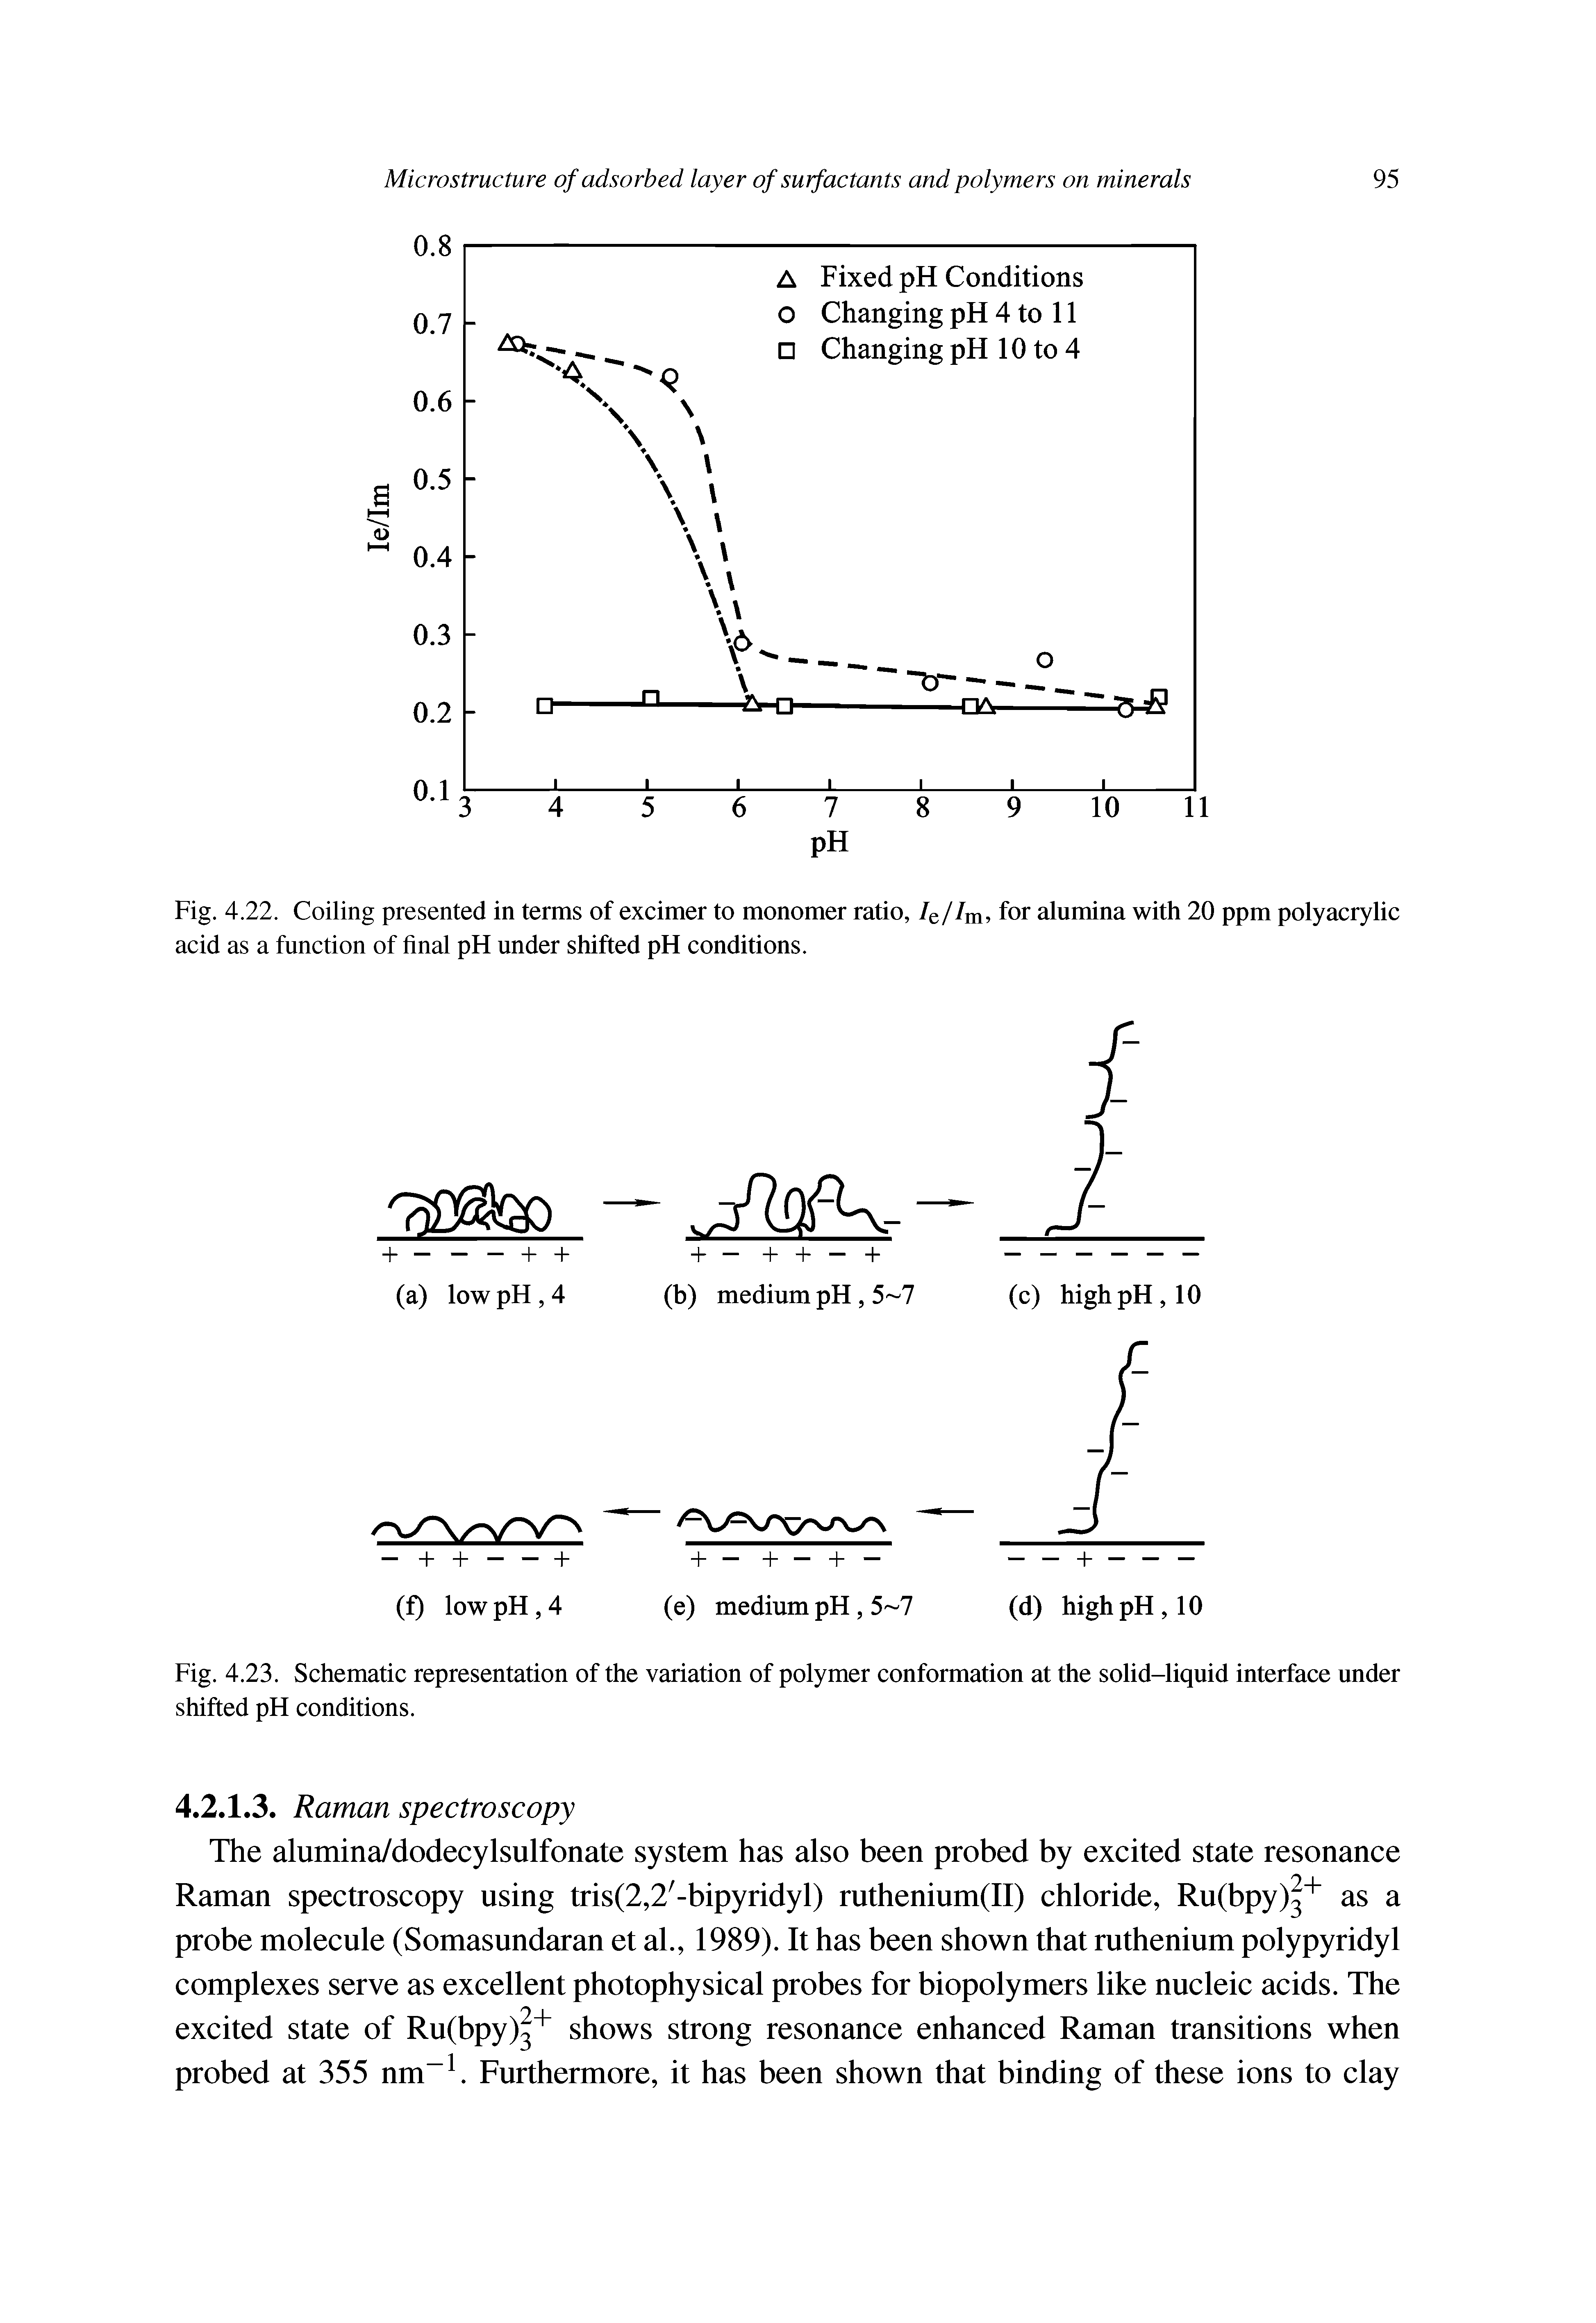 Fig. 4.23. Schematic representation of the variation of polymer conformation at the solid-liquid interface under shifted pH conditions.